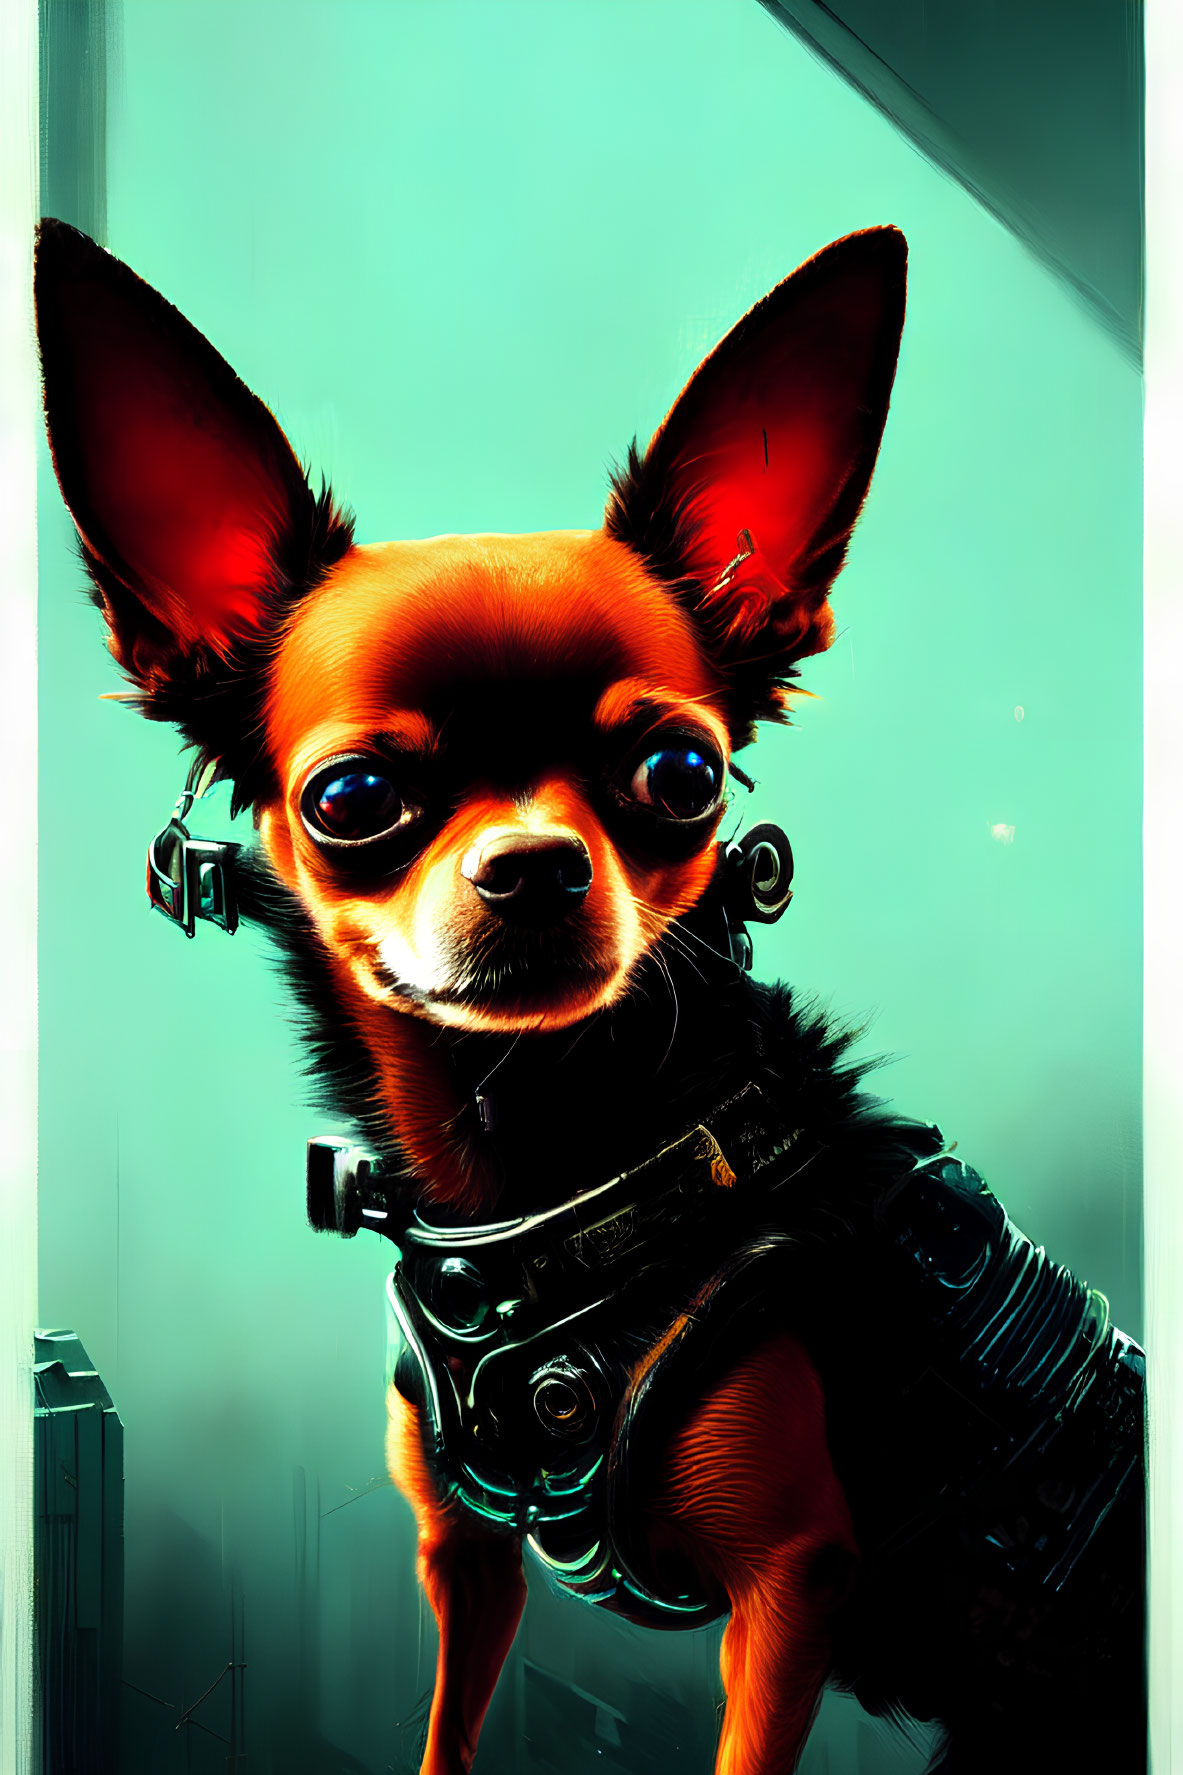 Stylized Chihuahua in Futuristic Gear on Teal Background